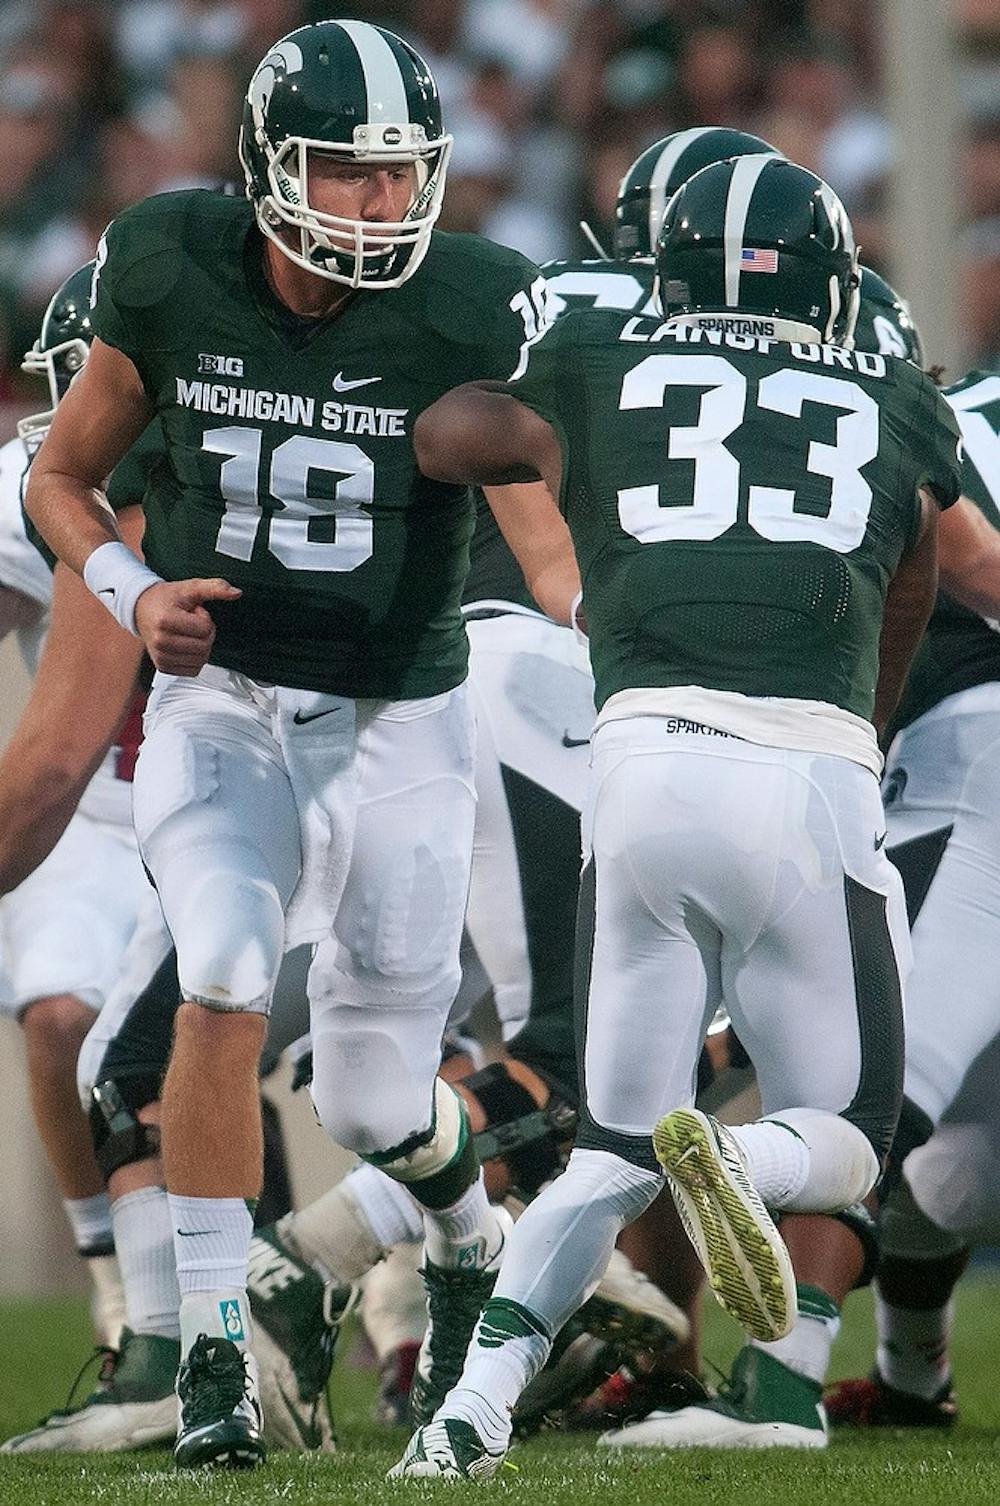 <p>Junior quarterback Connor Cook hands the ball off to senior running back Jeremy Langford during the game against Jacksonville State on Aug. 29, 2014, at Spartan Stadium. The Spartans defeated the Gamecocks, 45-7. Julia Nagy/The State News</p>